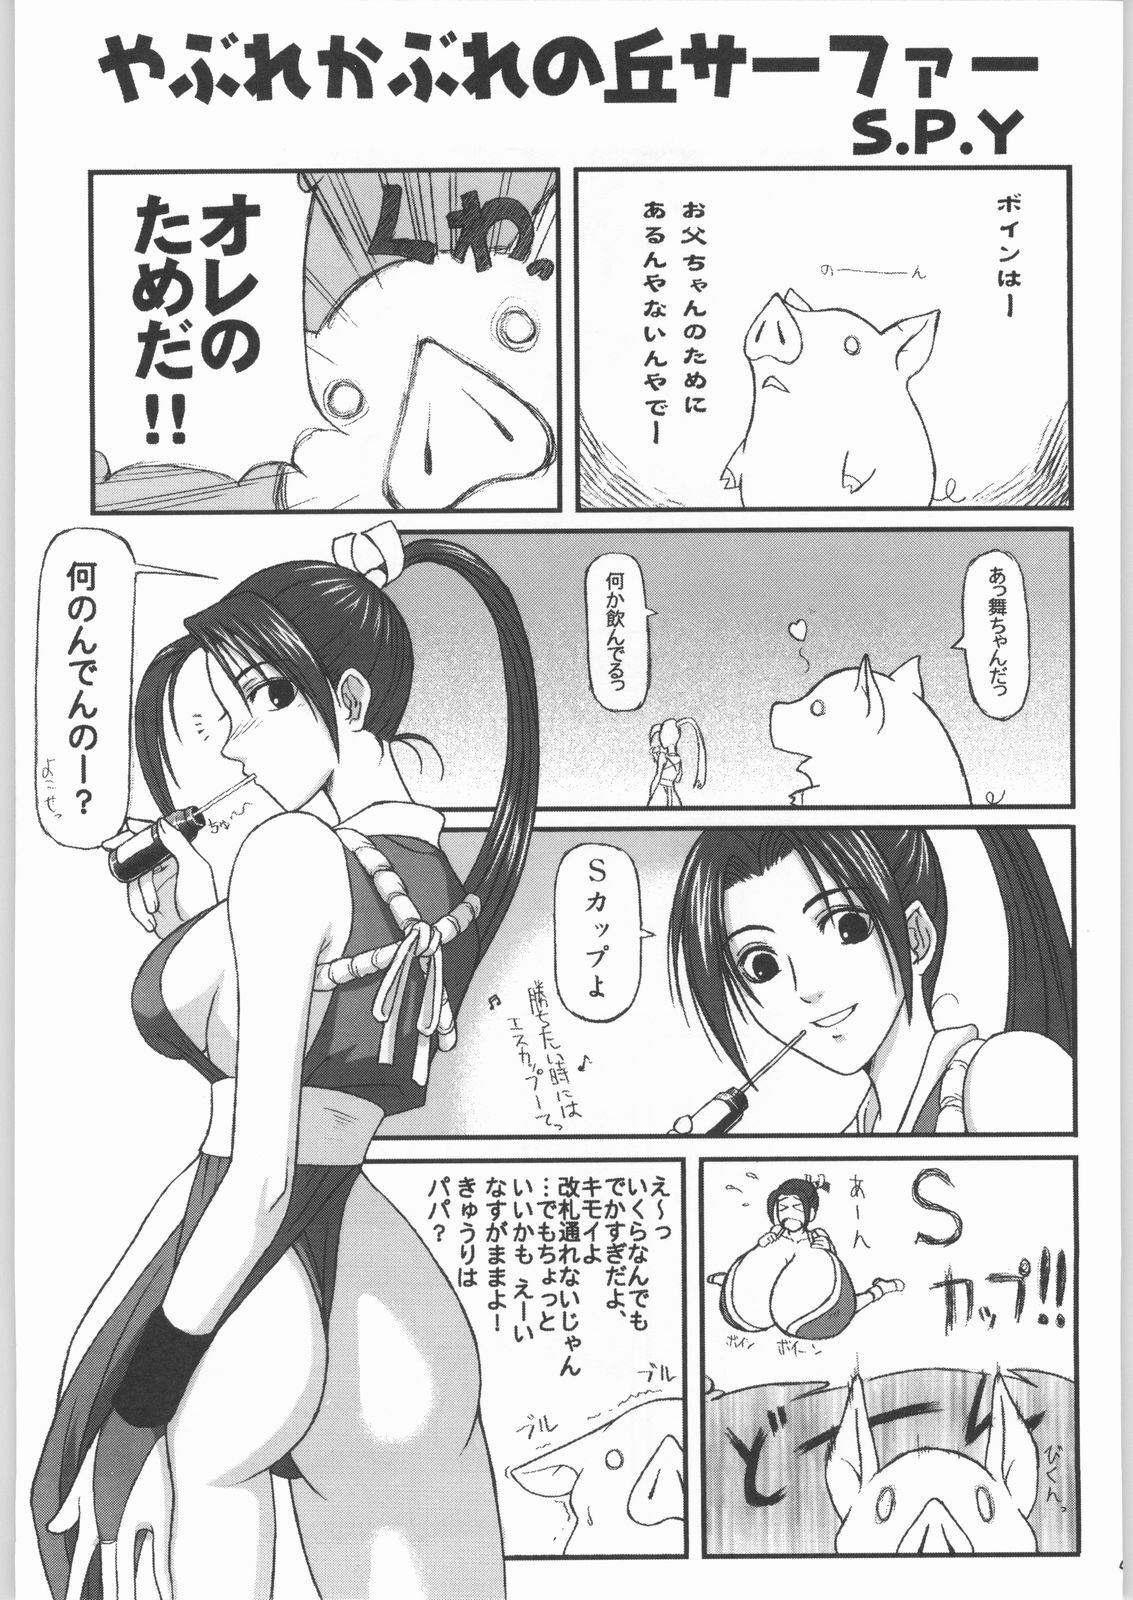 [SNK] Shiranui (Over Flows) page 42 full